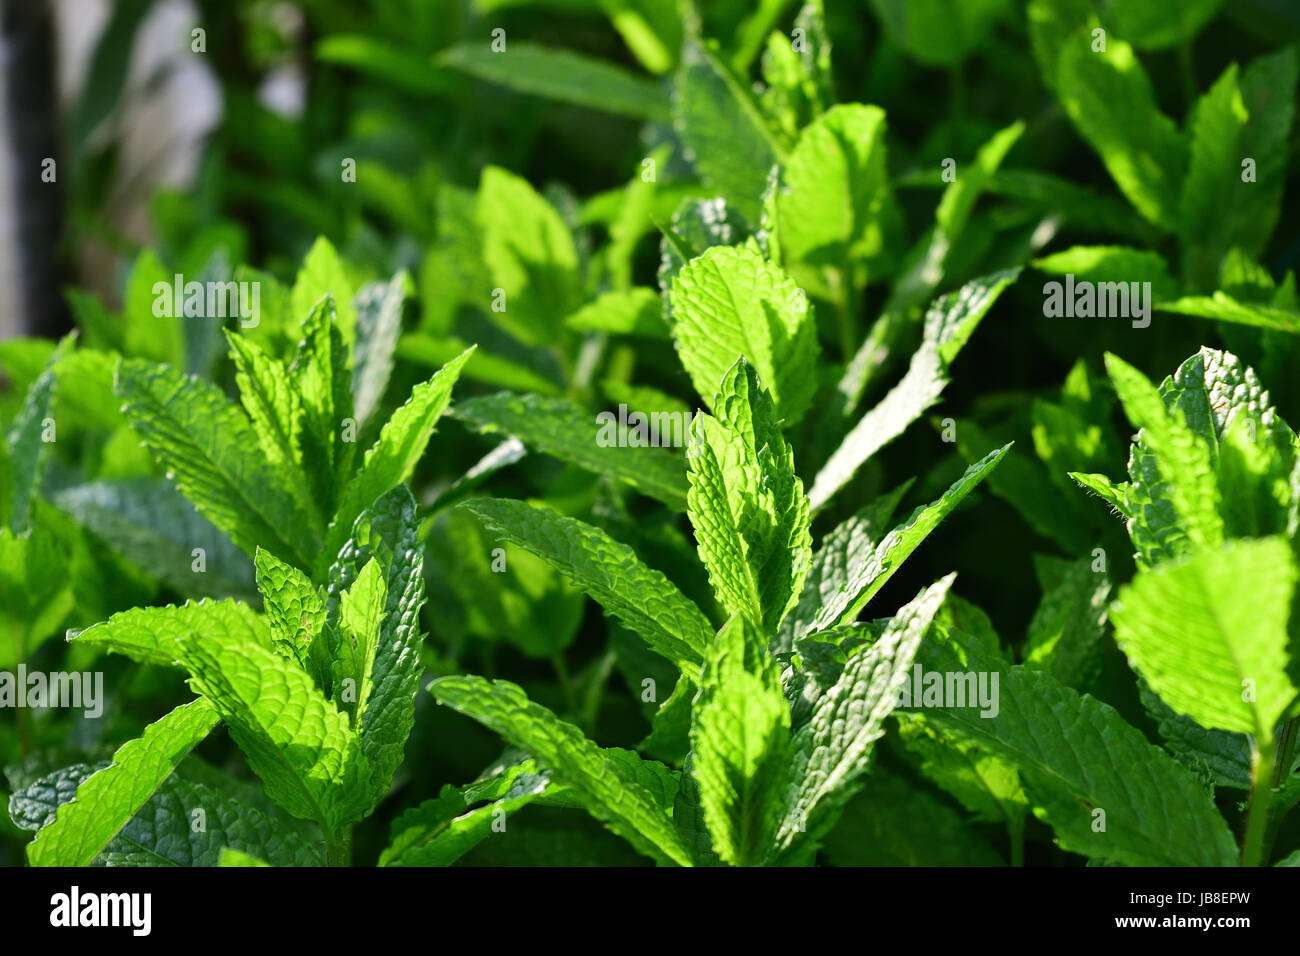 Fresh mint leaves in close up photo, sunny image. It is an aromatic plant native to temperate regions of the Old World. Stock Photo